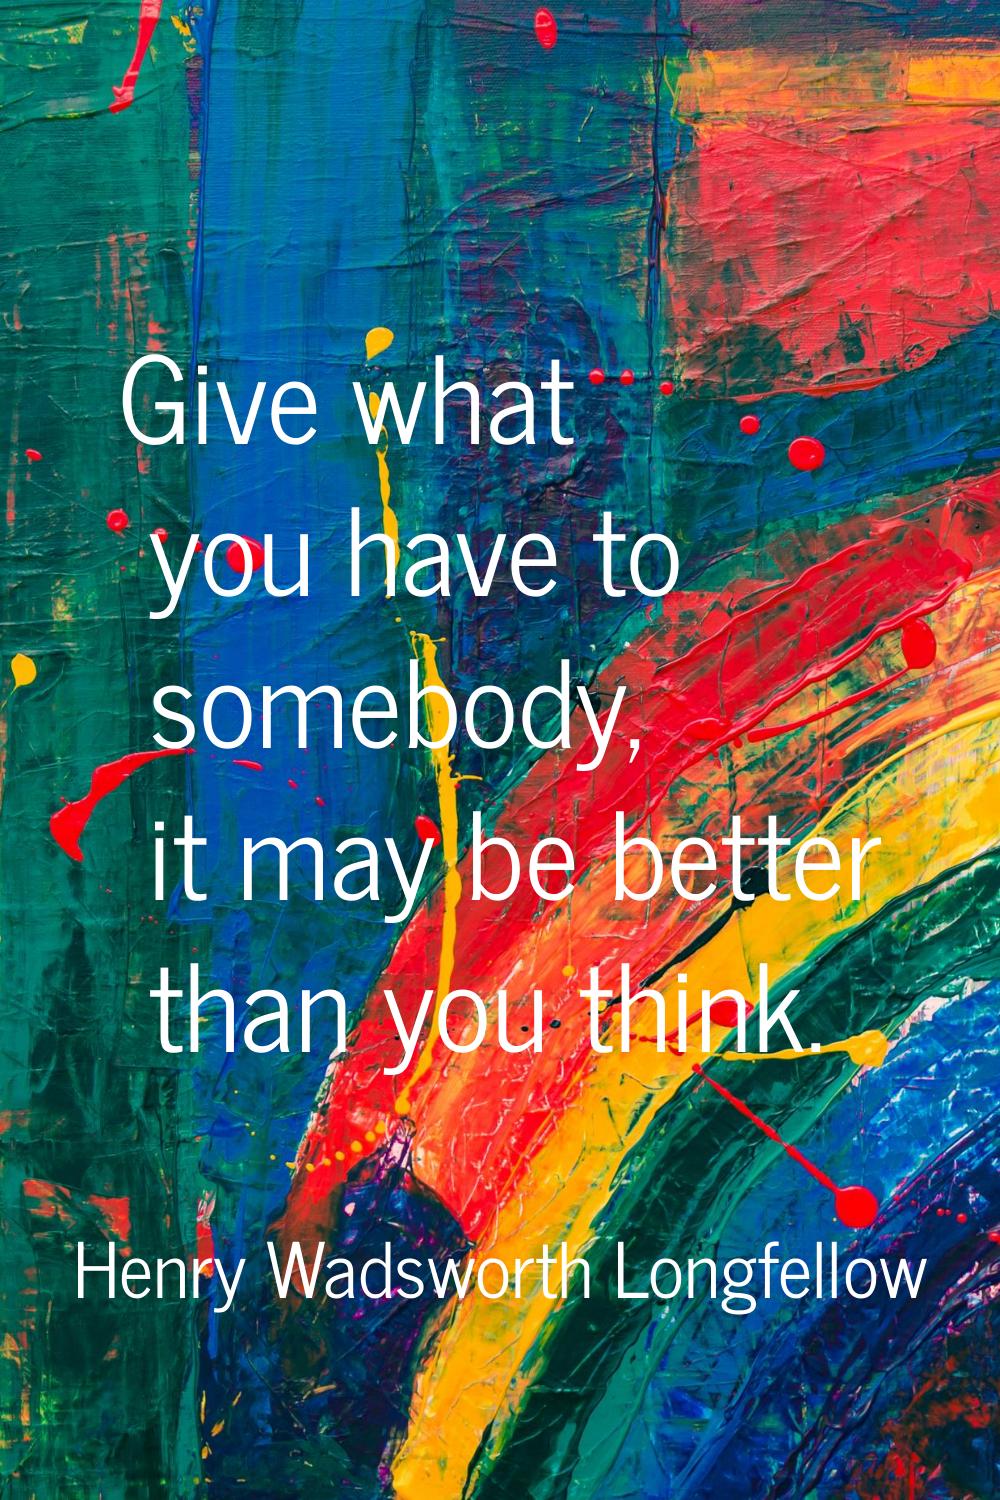 Give what you have to somebody, it may be better than you think.